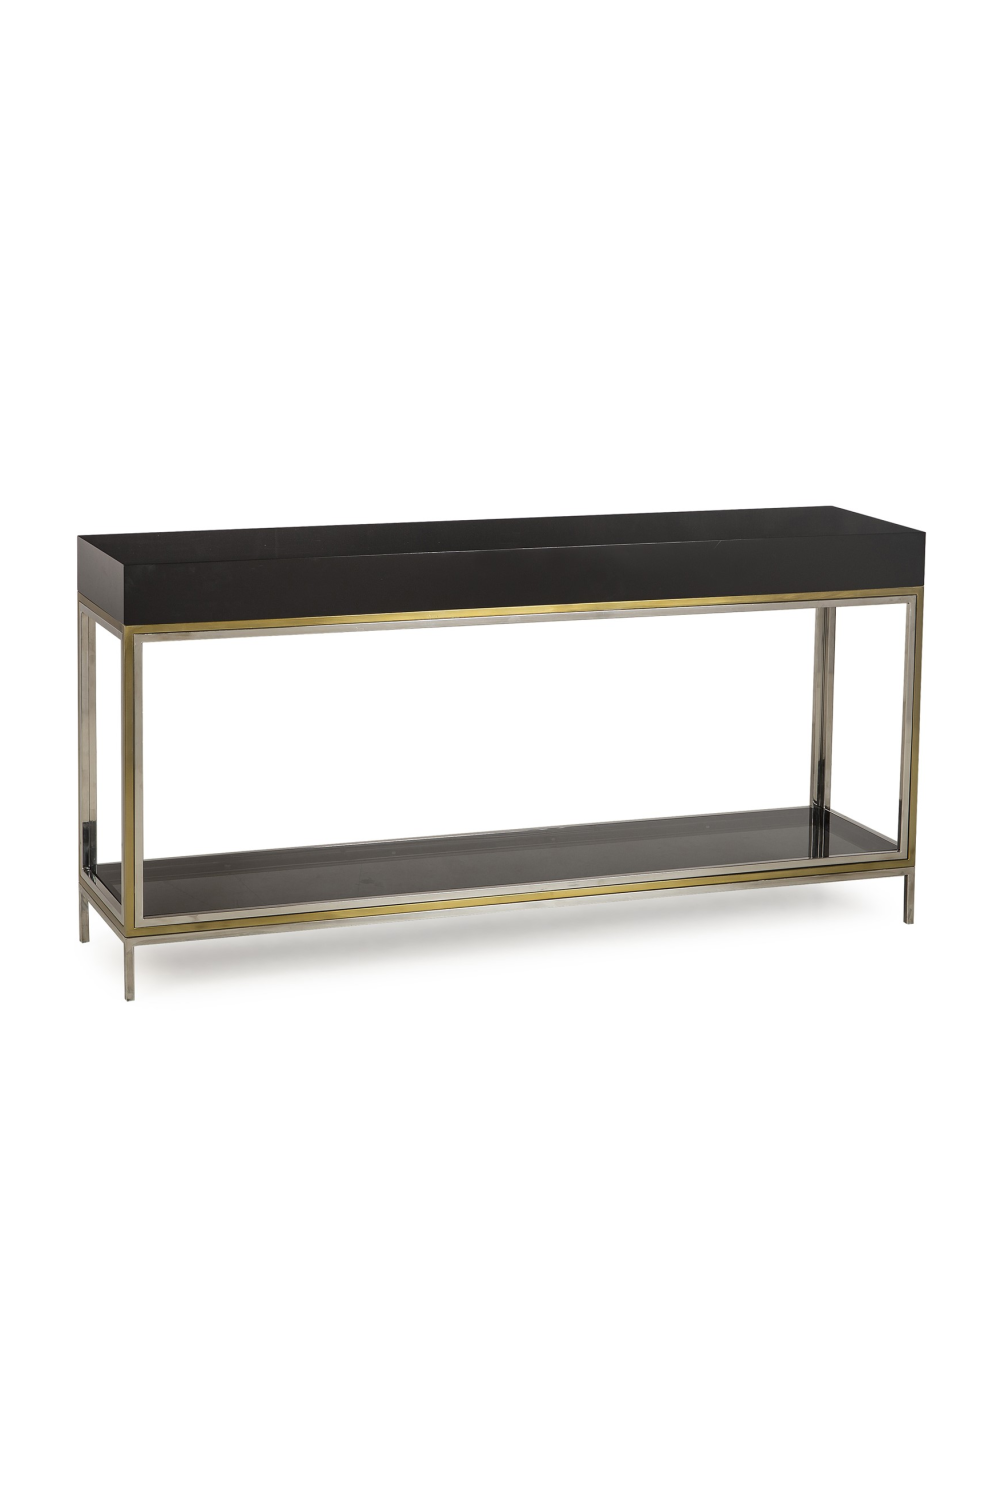 Black Lacquer with Undershelf Console Table | Andrew Martin Harlequin | OROA